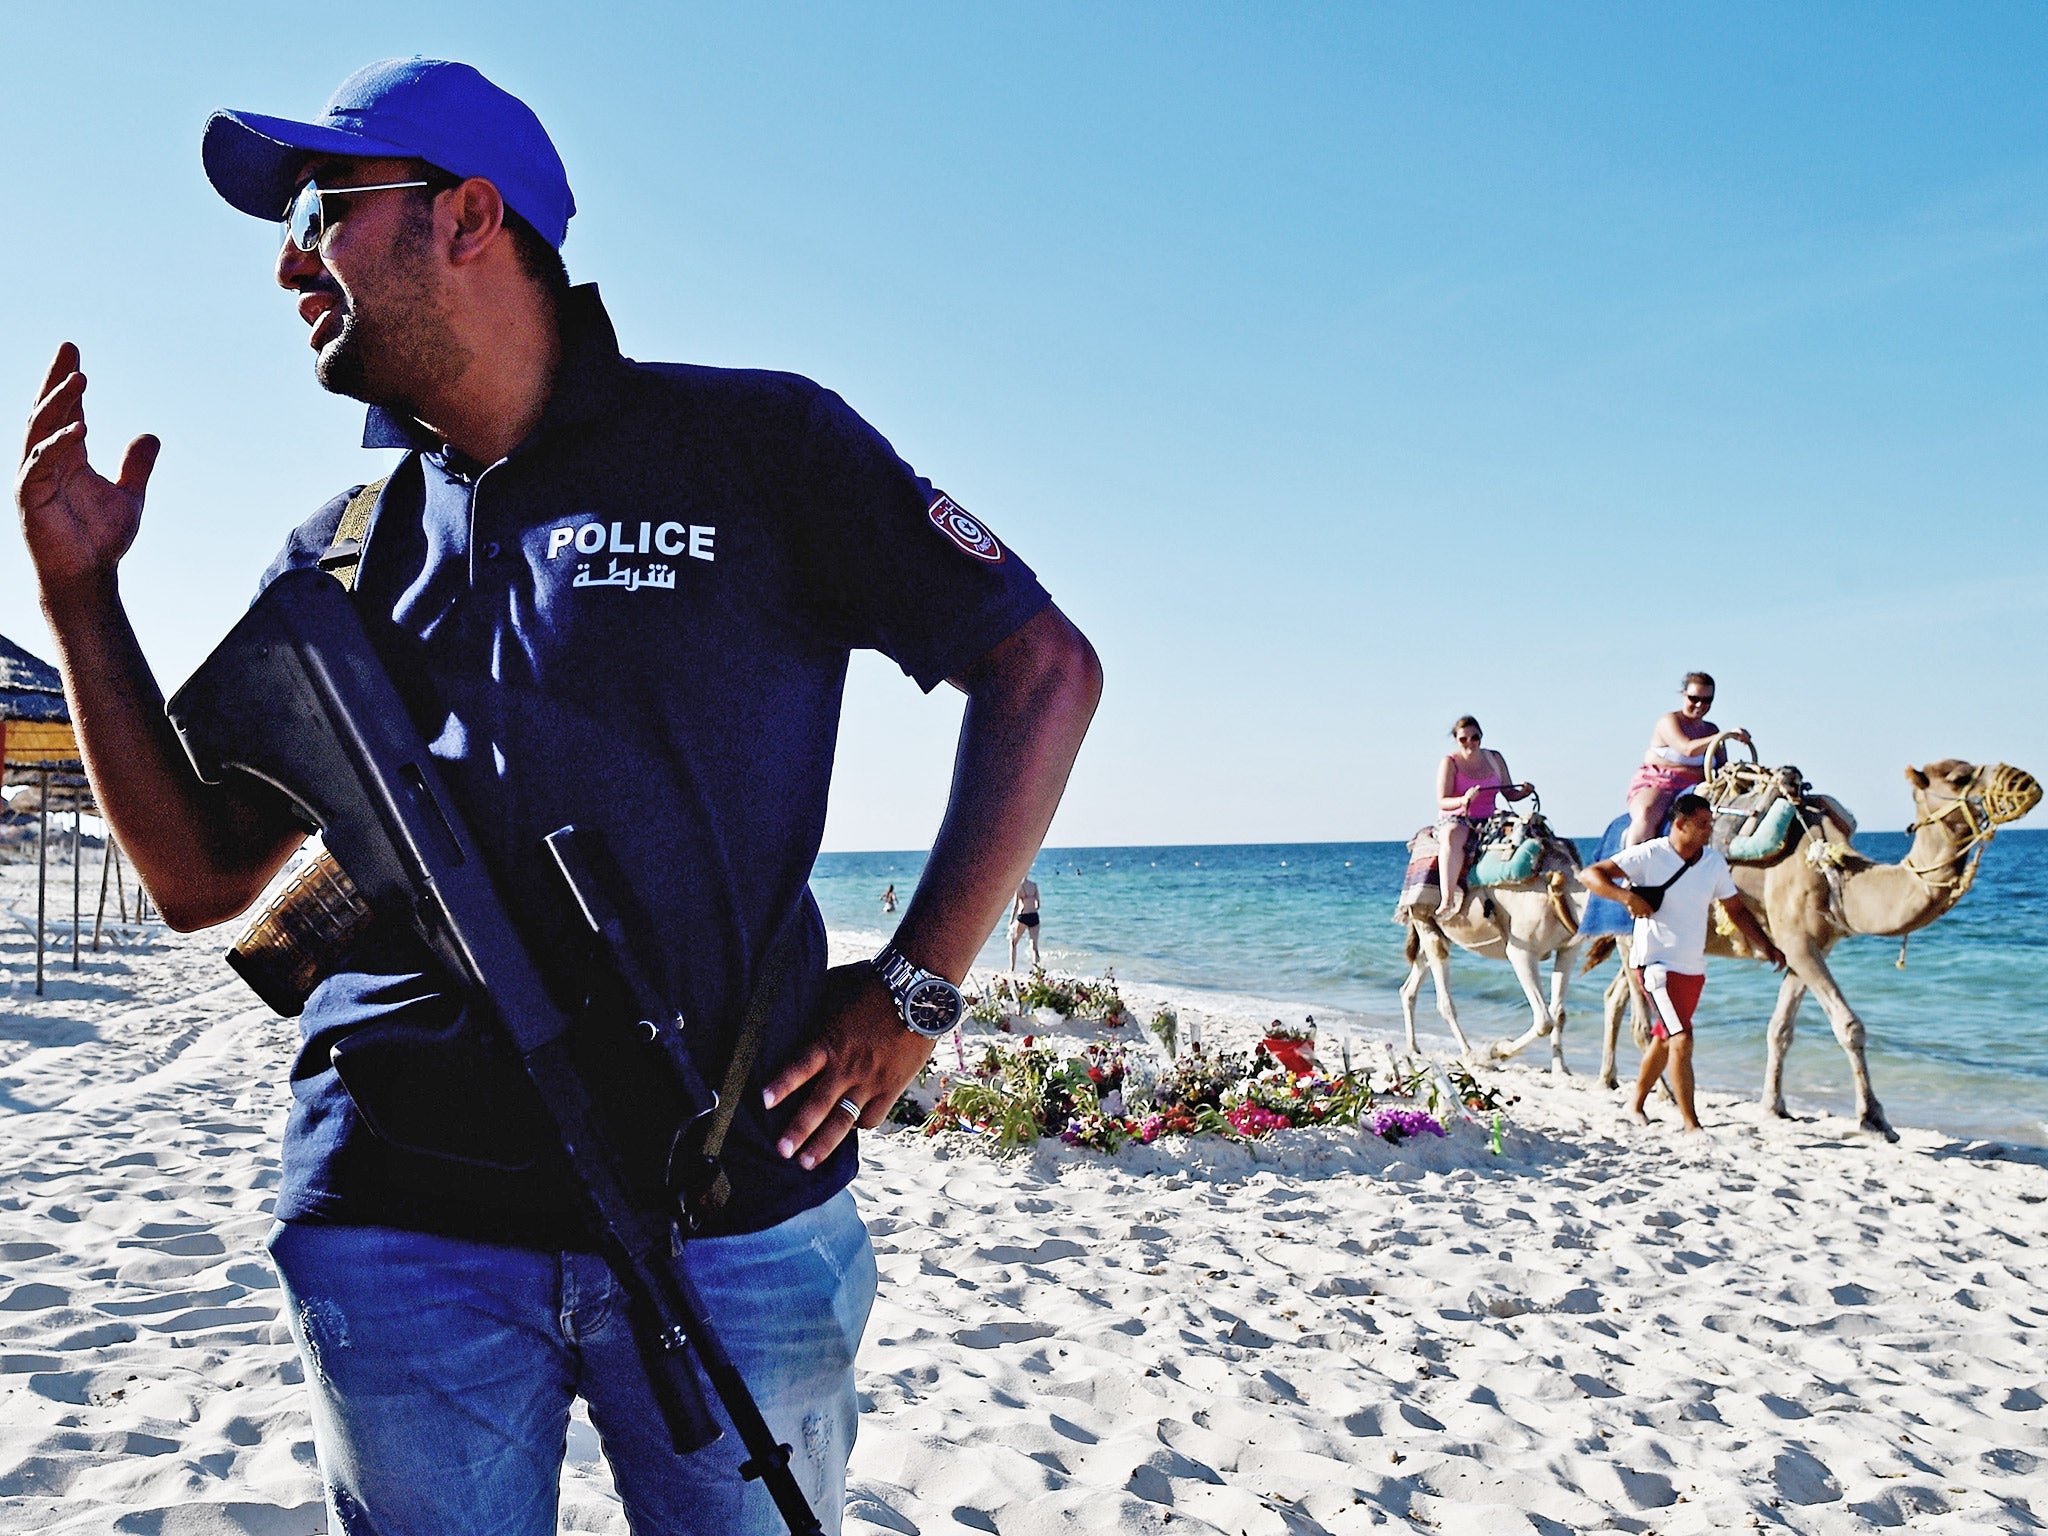 Armed police continue to patrol Marhaba beach in Sousse